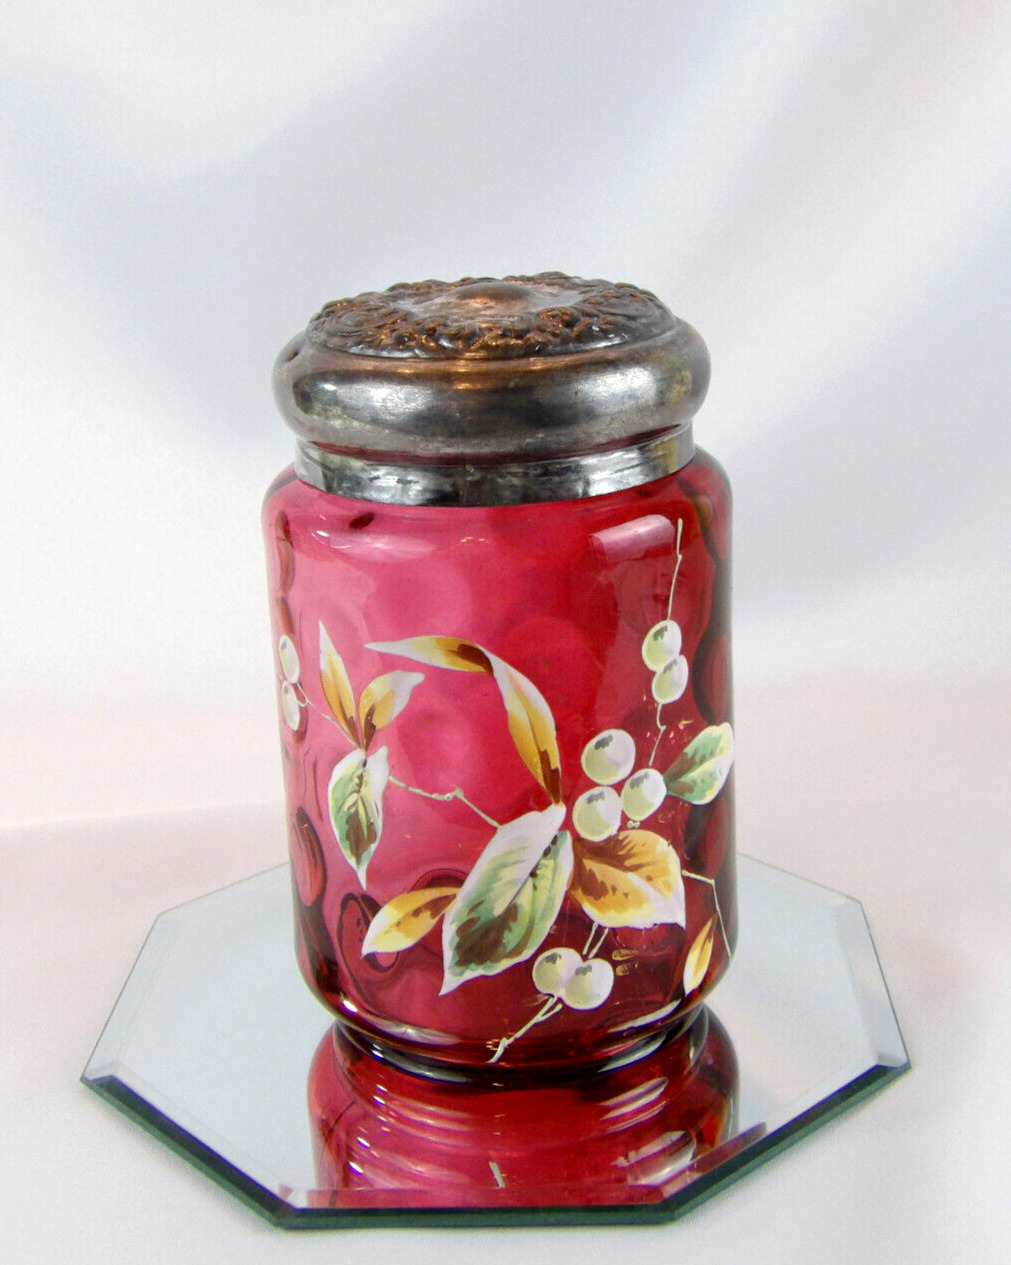 EAPG Enamel Painted Cranberry Glass Tobacco Humidor Jar Spot Optic Silver Plate